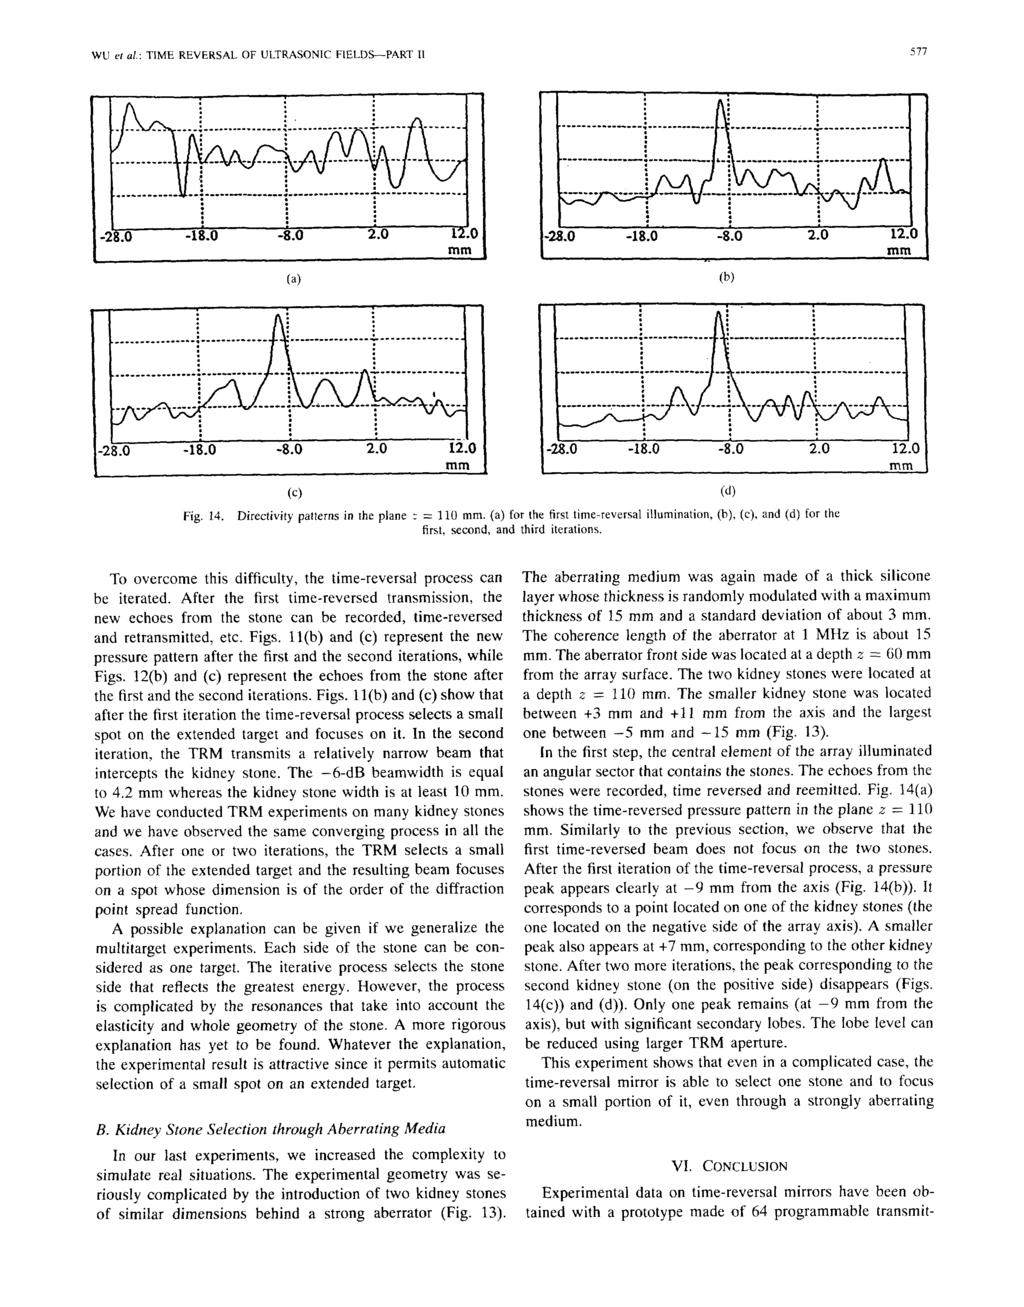 WU ef d.: TIME REVERSAL OF ULTRASONIC FIELDS-PART II 577 Fig. 14. Directivity patterns in the plane 3 = 110. (a) for the first time-reversal illumination, (h), (c), and (d) for the first.